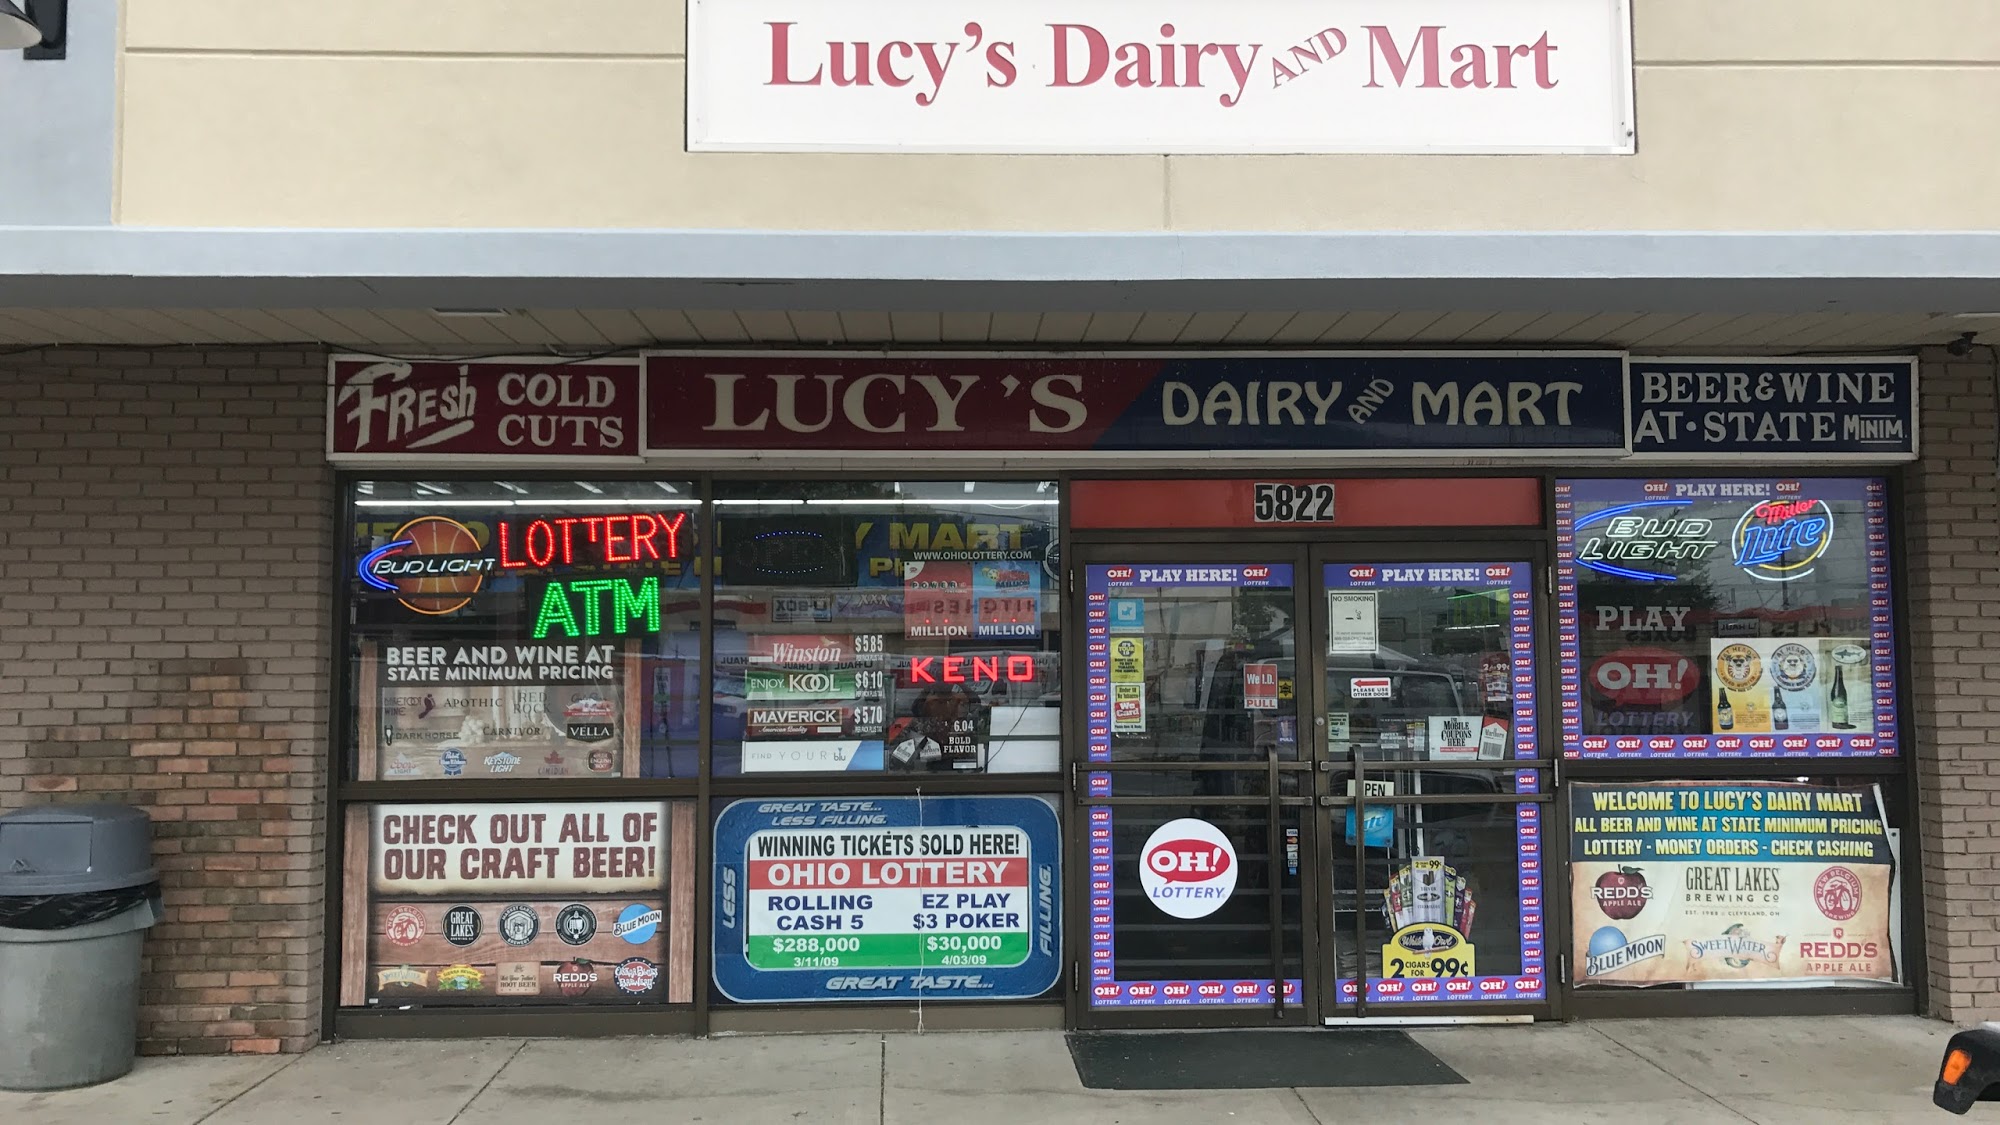 Lucy Dairy Mart